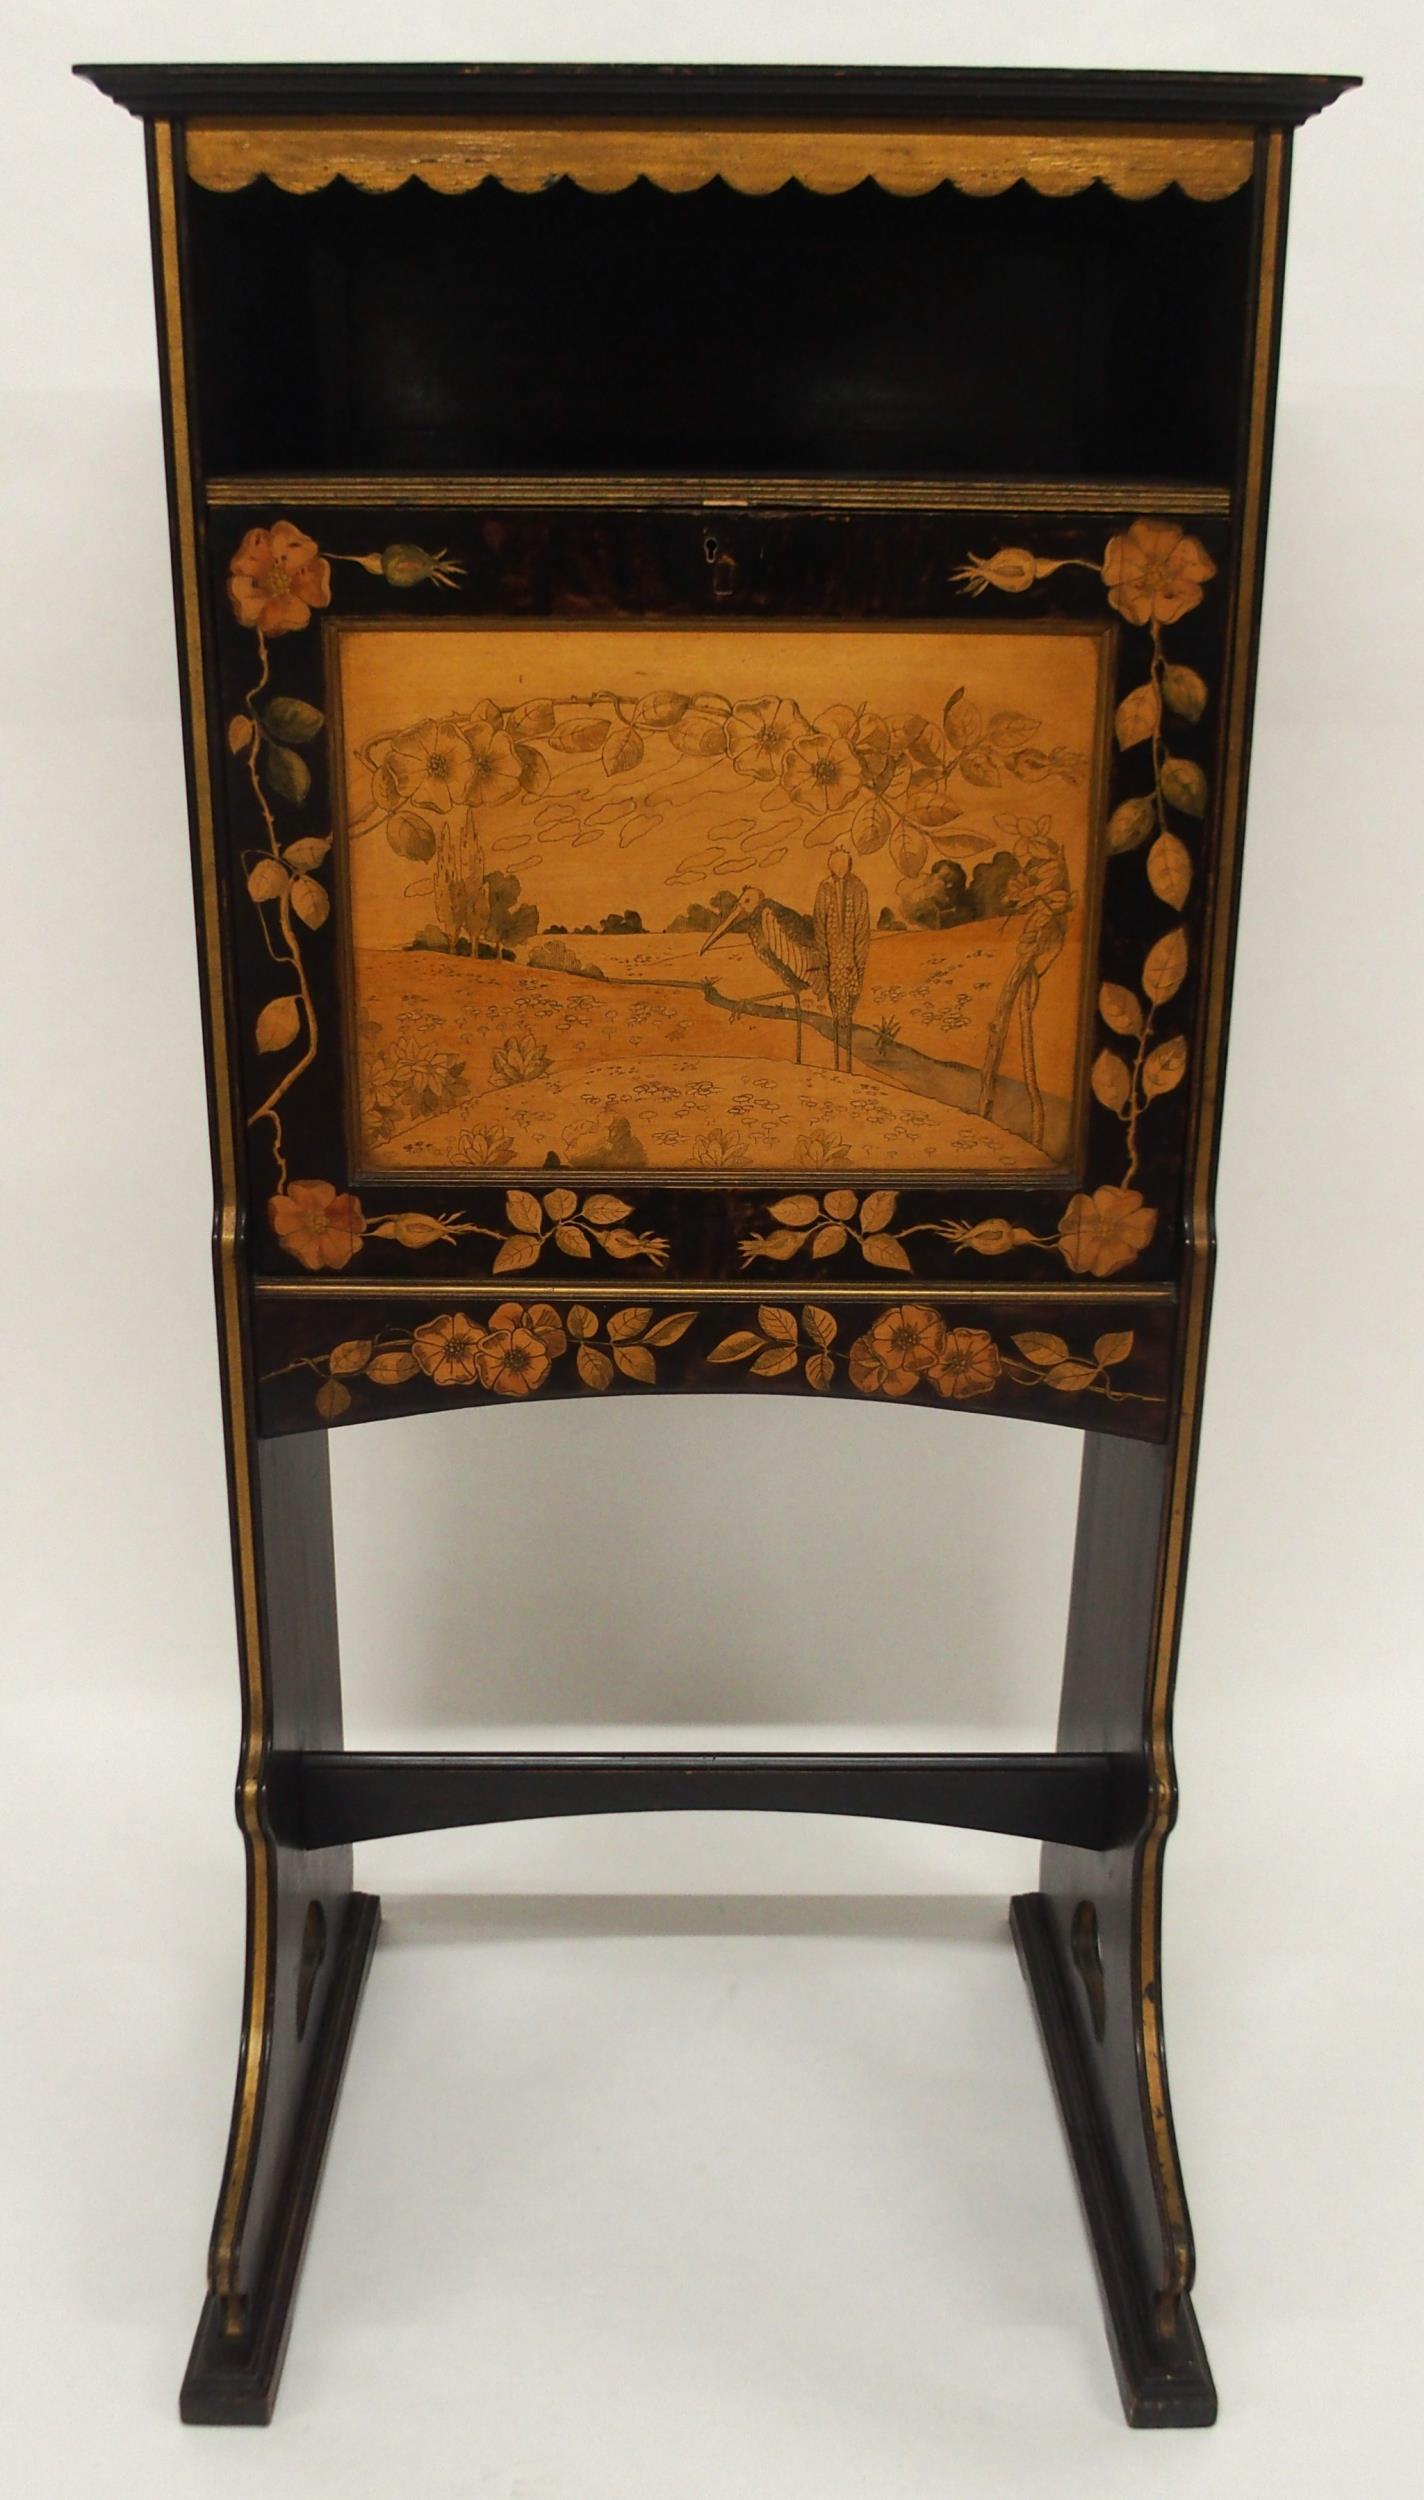 A 19TH CENTURY GERMAN ARTS & CRAFTS EBONISED AND MARQUETRY INLAID SECRETAIRE BUREAU with moulded